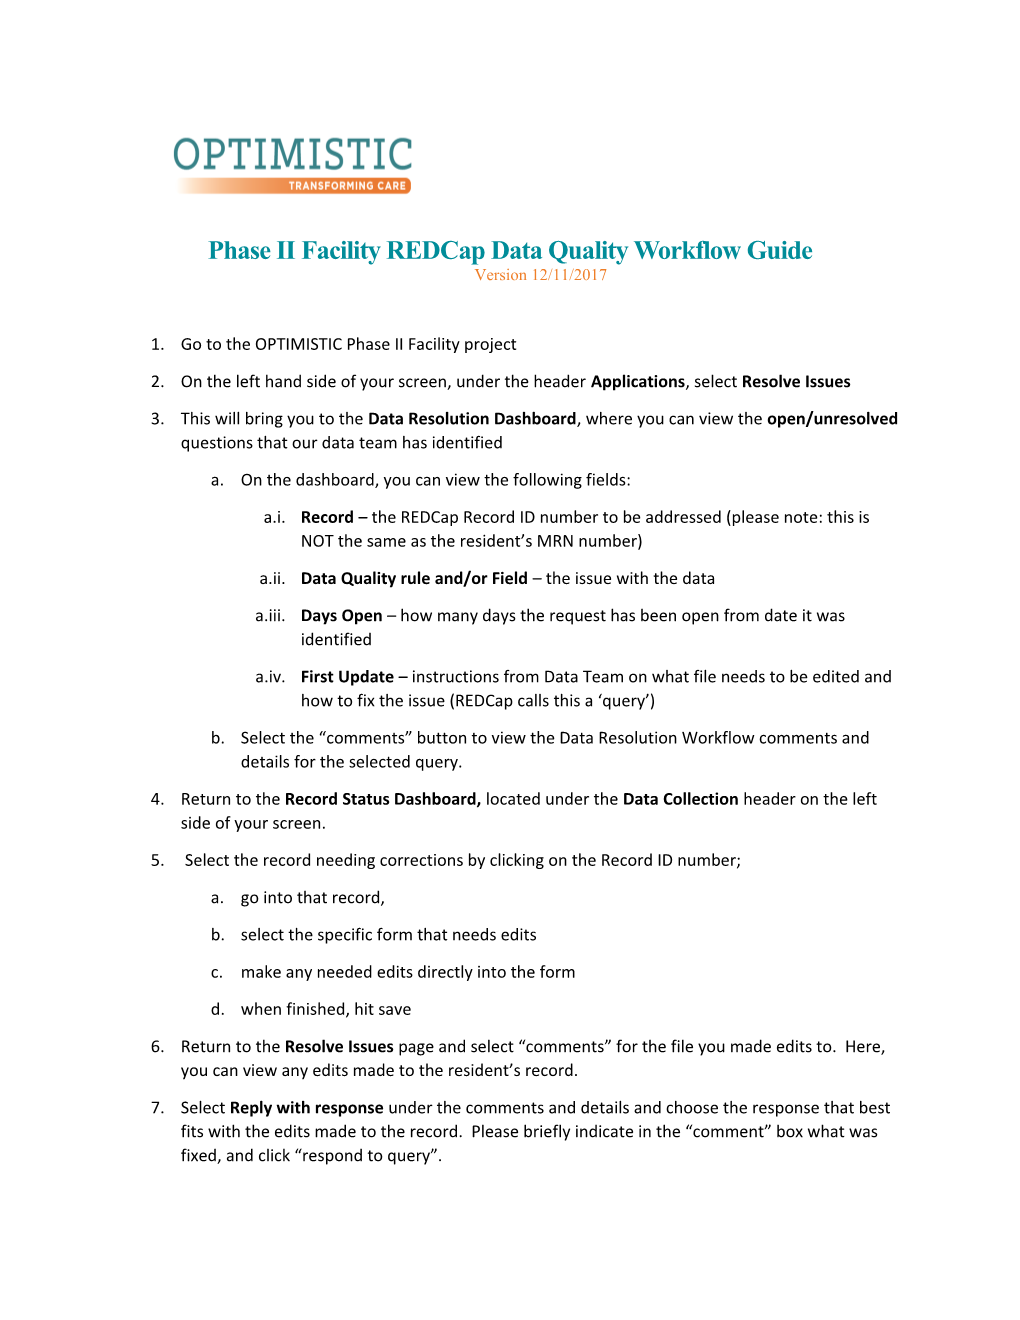 Phase II Facility Redcap Data Quality Workflow Guide